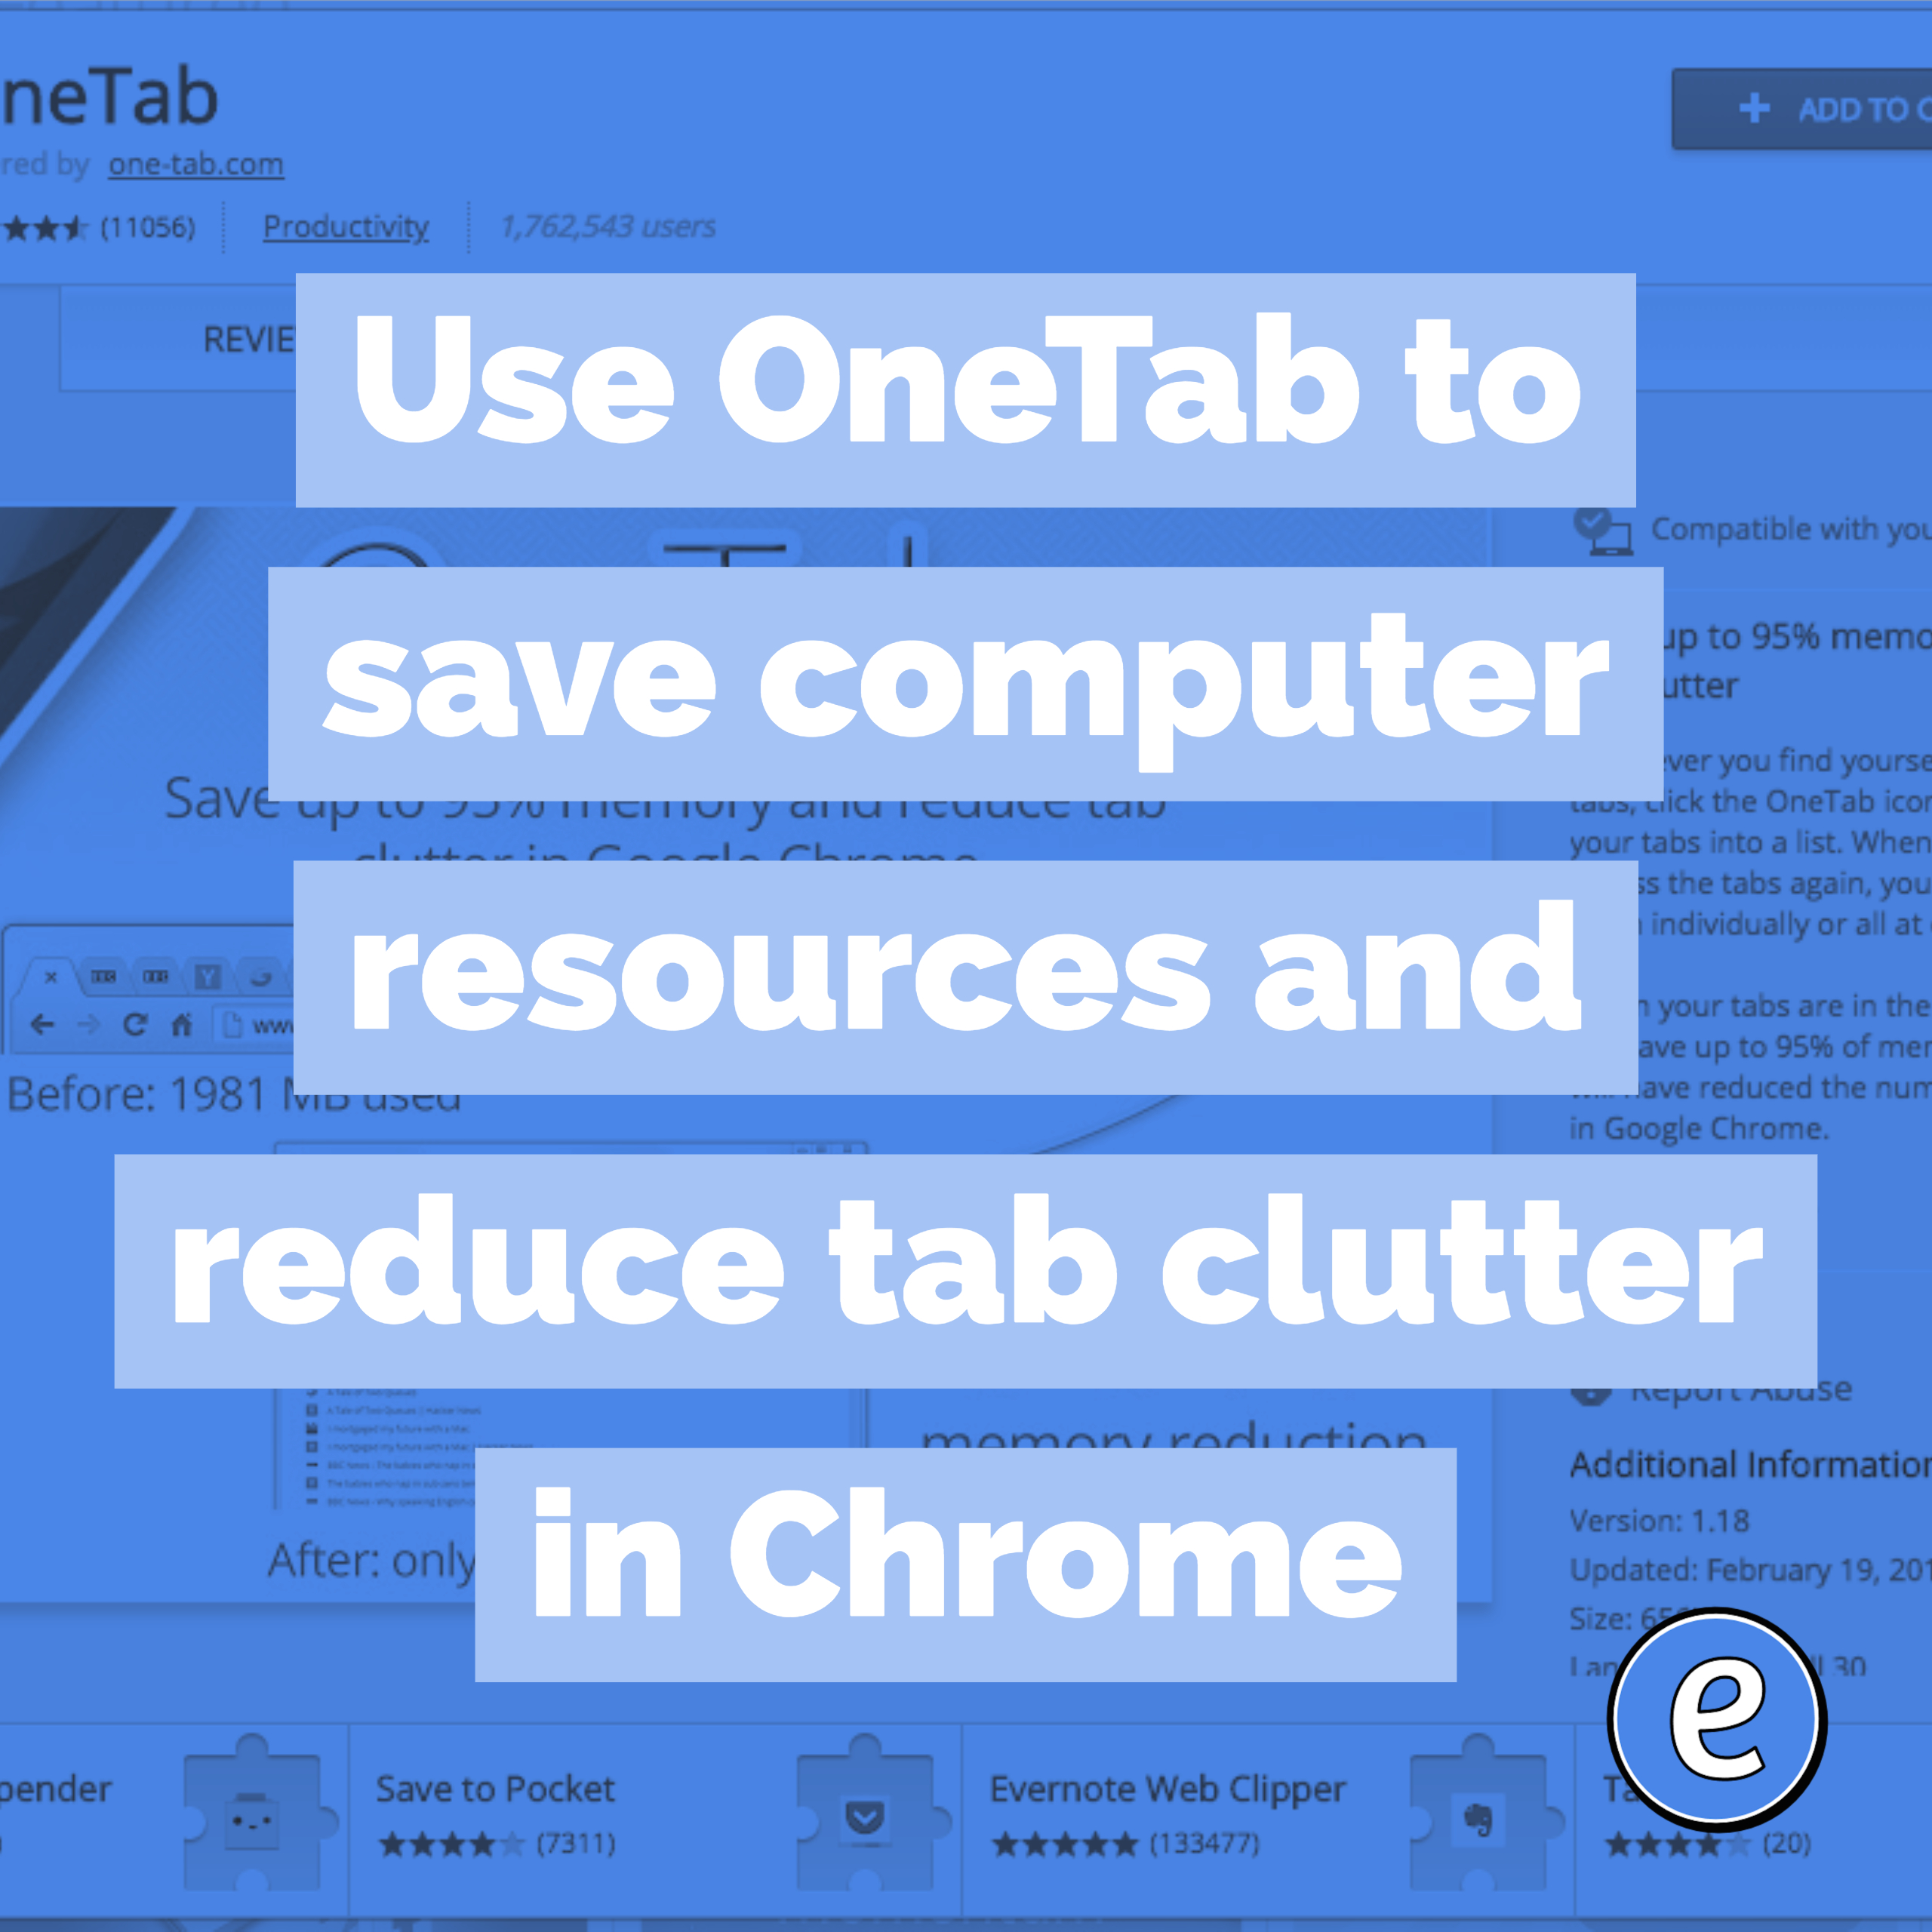 Use OneTab to save computer resources and reduce tab clutter in Chrome